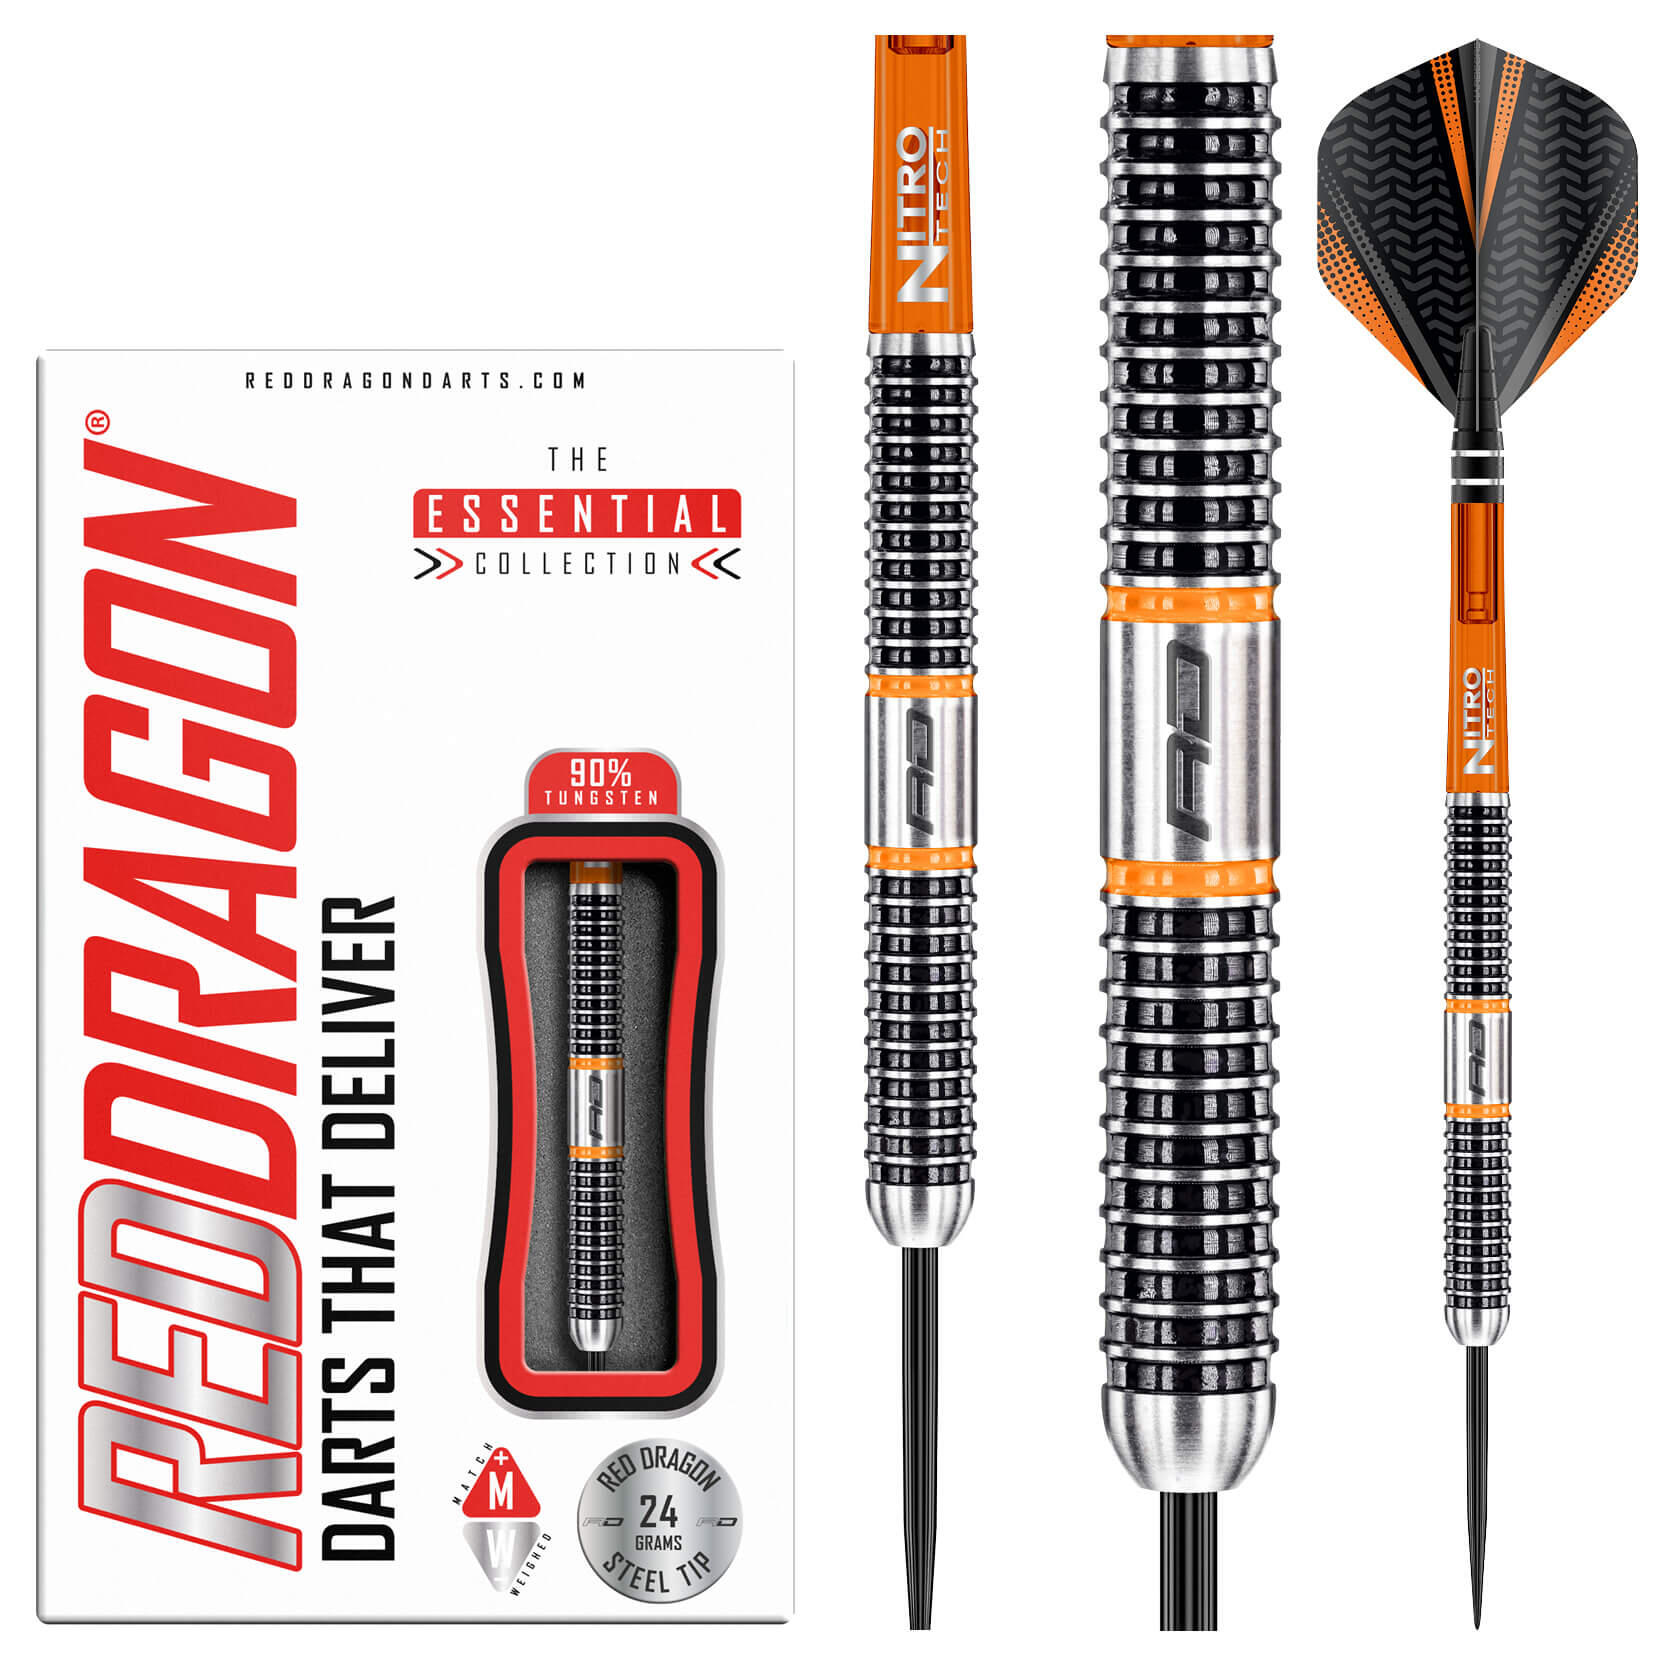 Amberjack 18: 24g Tungsten Darts Set with Flights and Stems 1/5